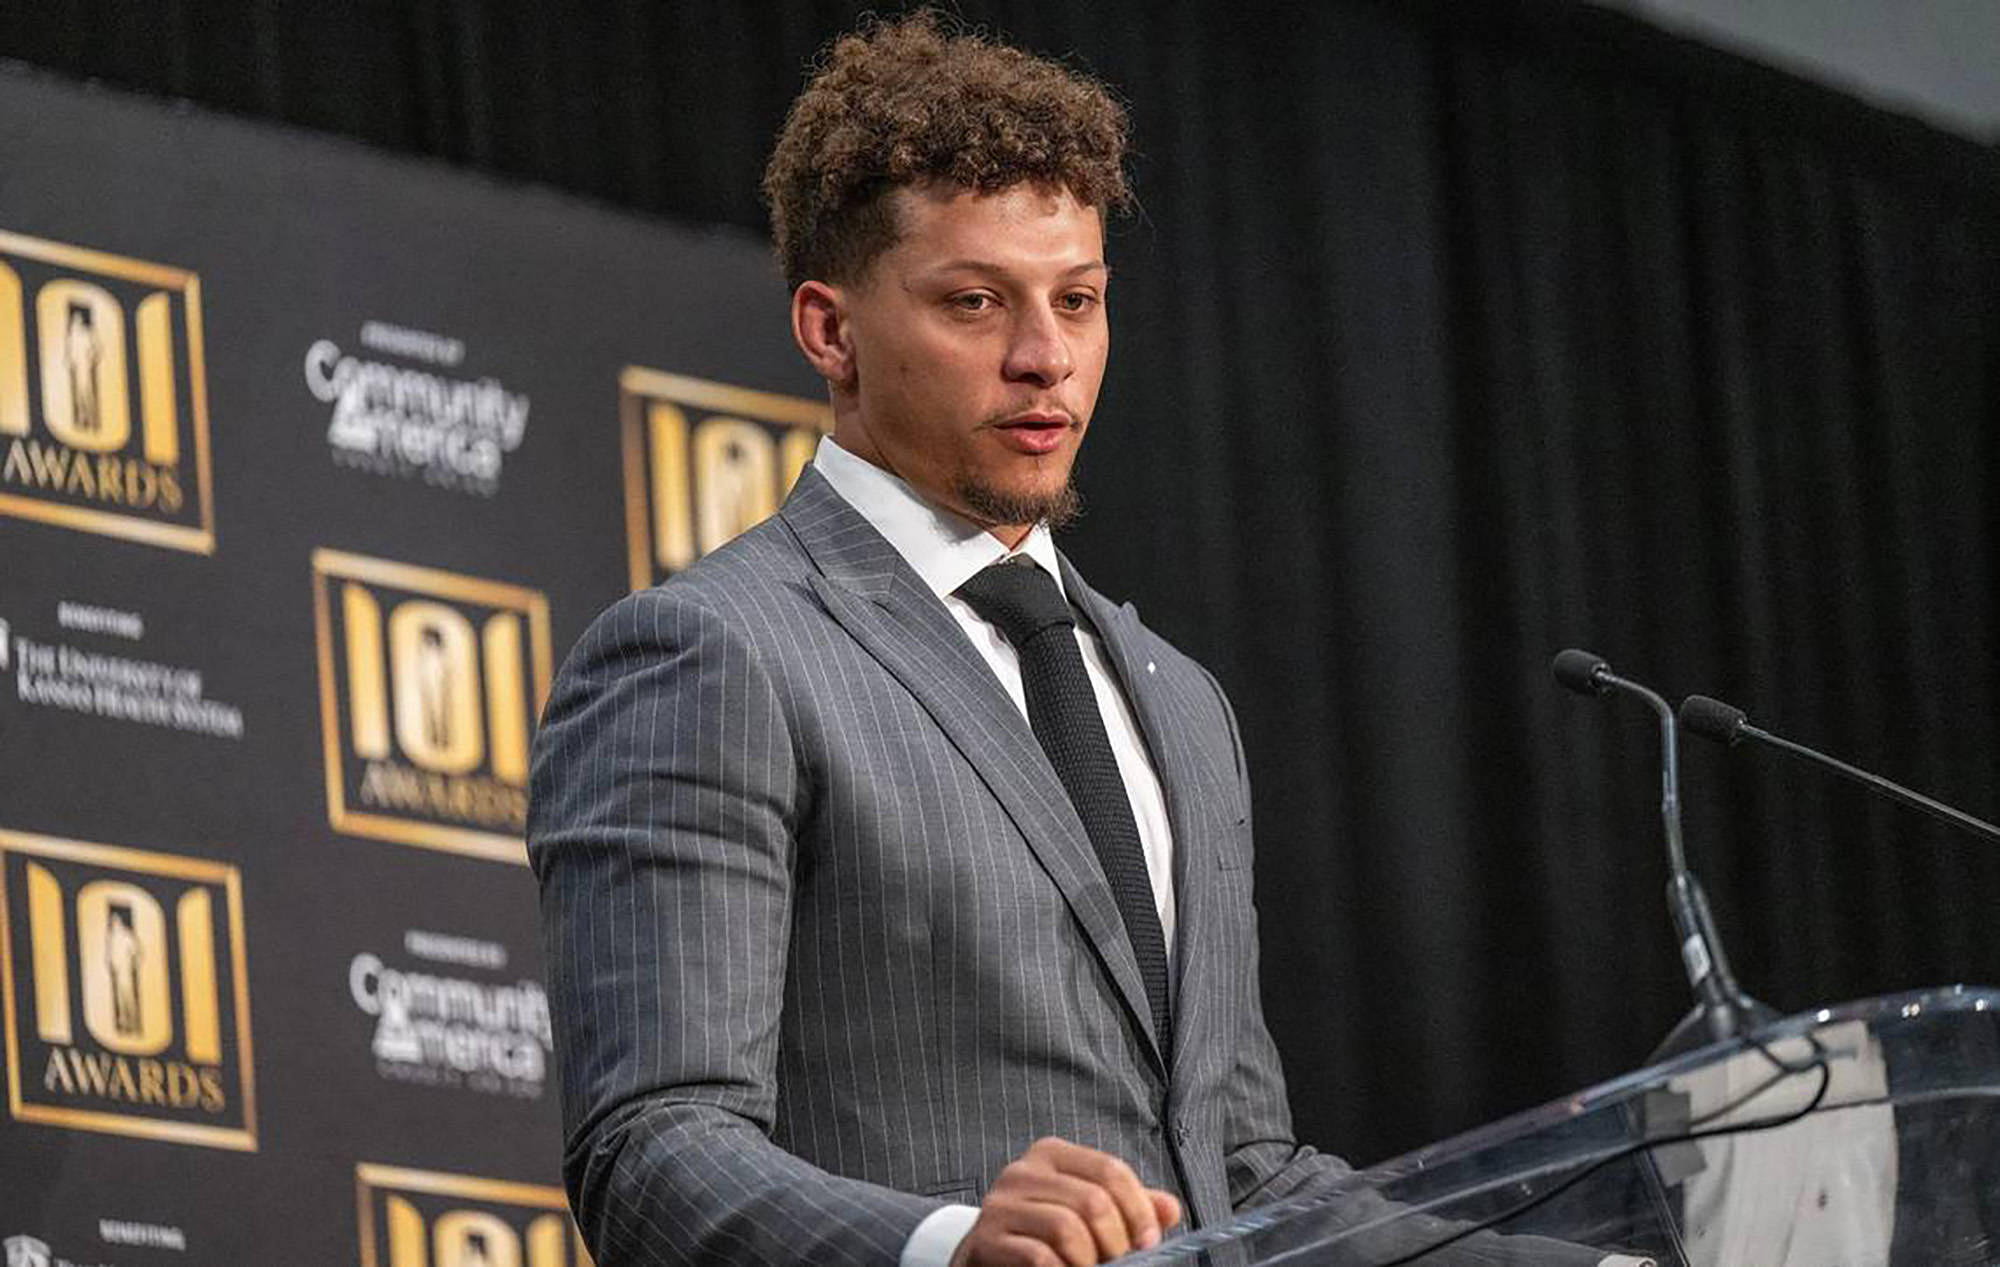 Patrick Mahomes Claims the Release Of His Time 100 Speech On Women’s Sports Was Badly Timed